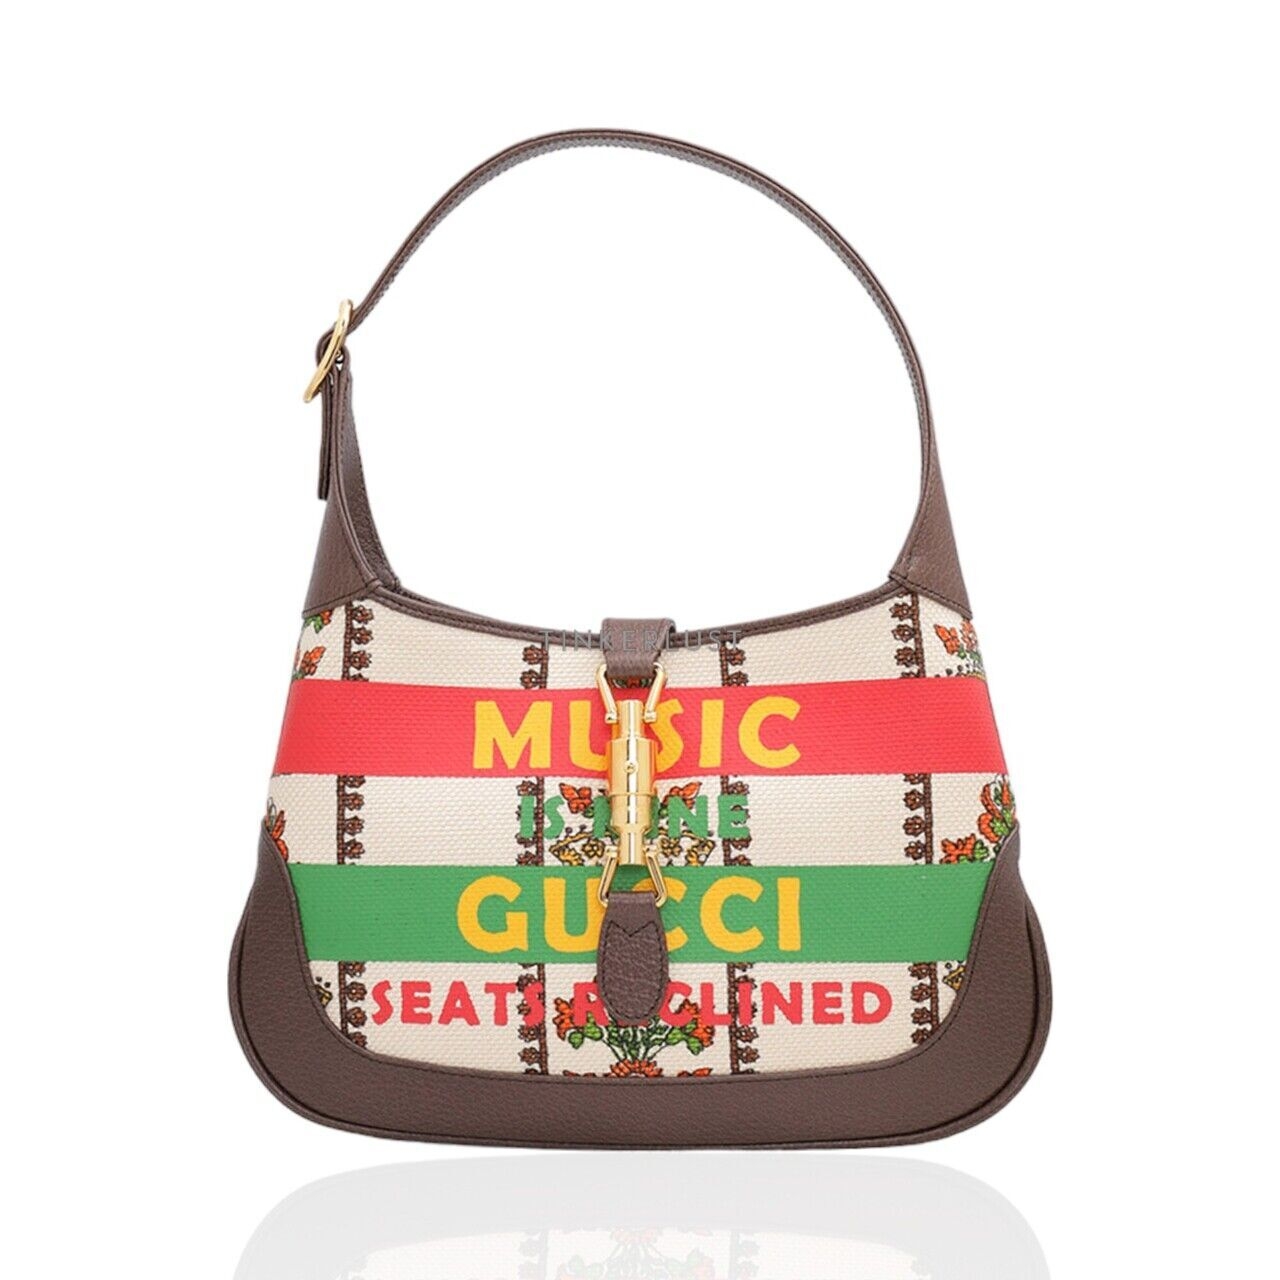 Gucci Small 100 'Music is Mine Gucci Seats Reclined' Jackie 1961 Shoulder Bag in Off White/Ebony Shoulder Bag